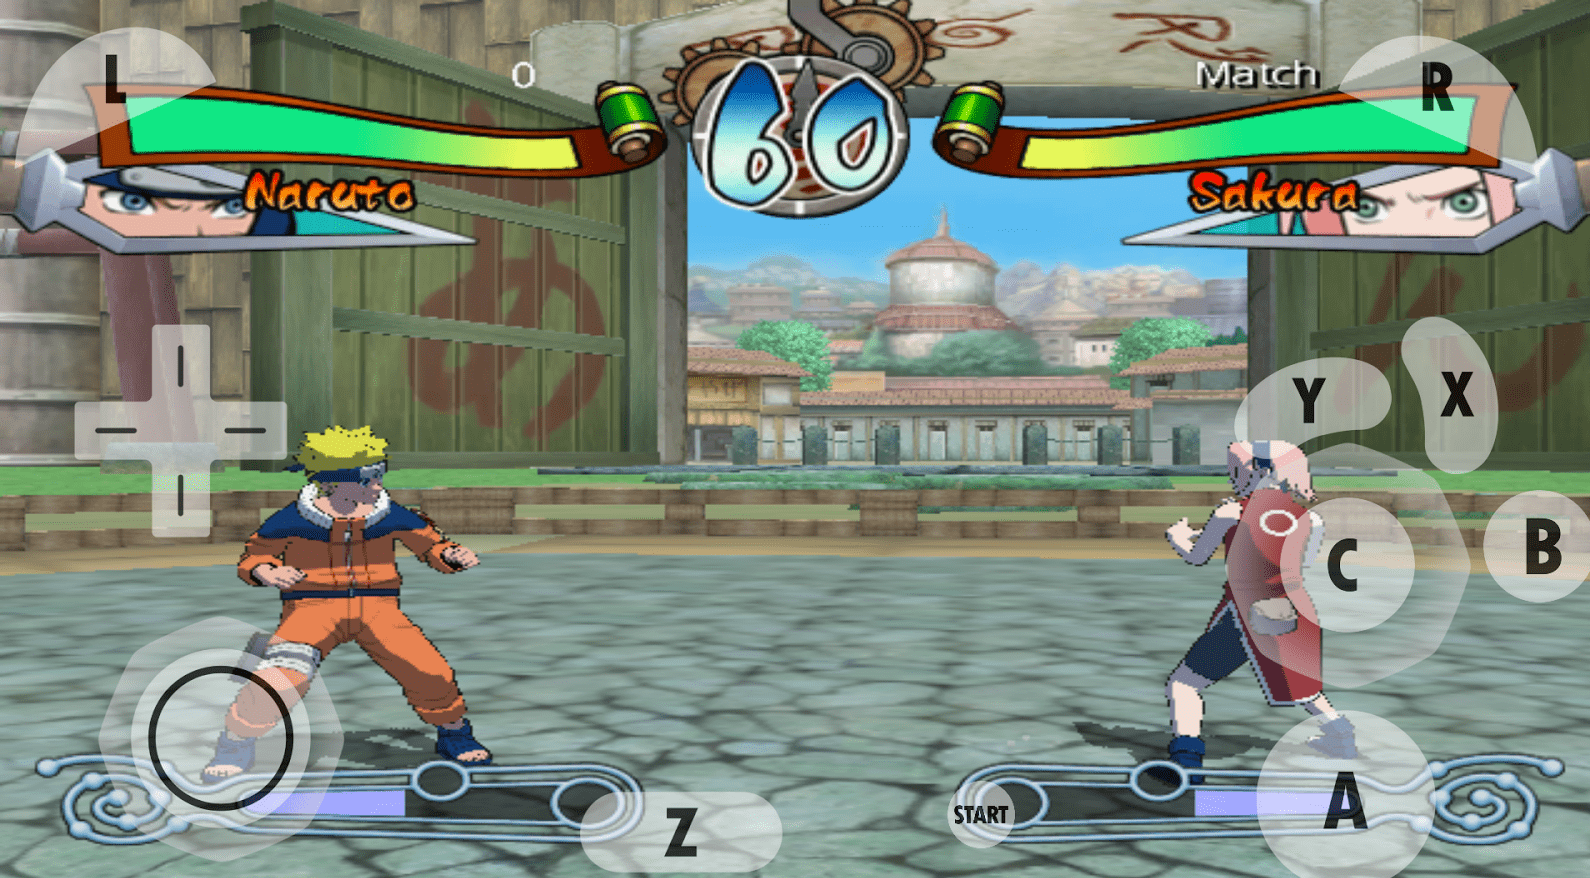 Download Latest Naruto Ultimate Ninja Storm 4 PPSSPP ISO